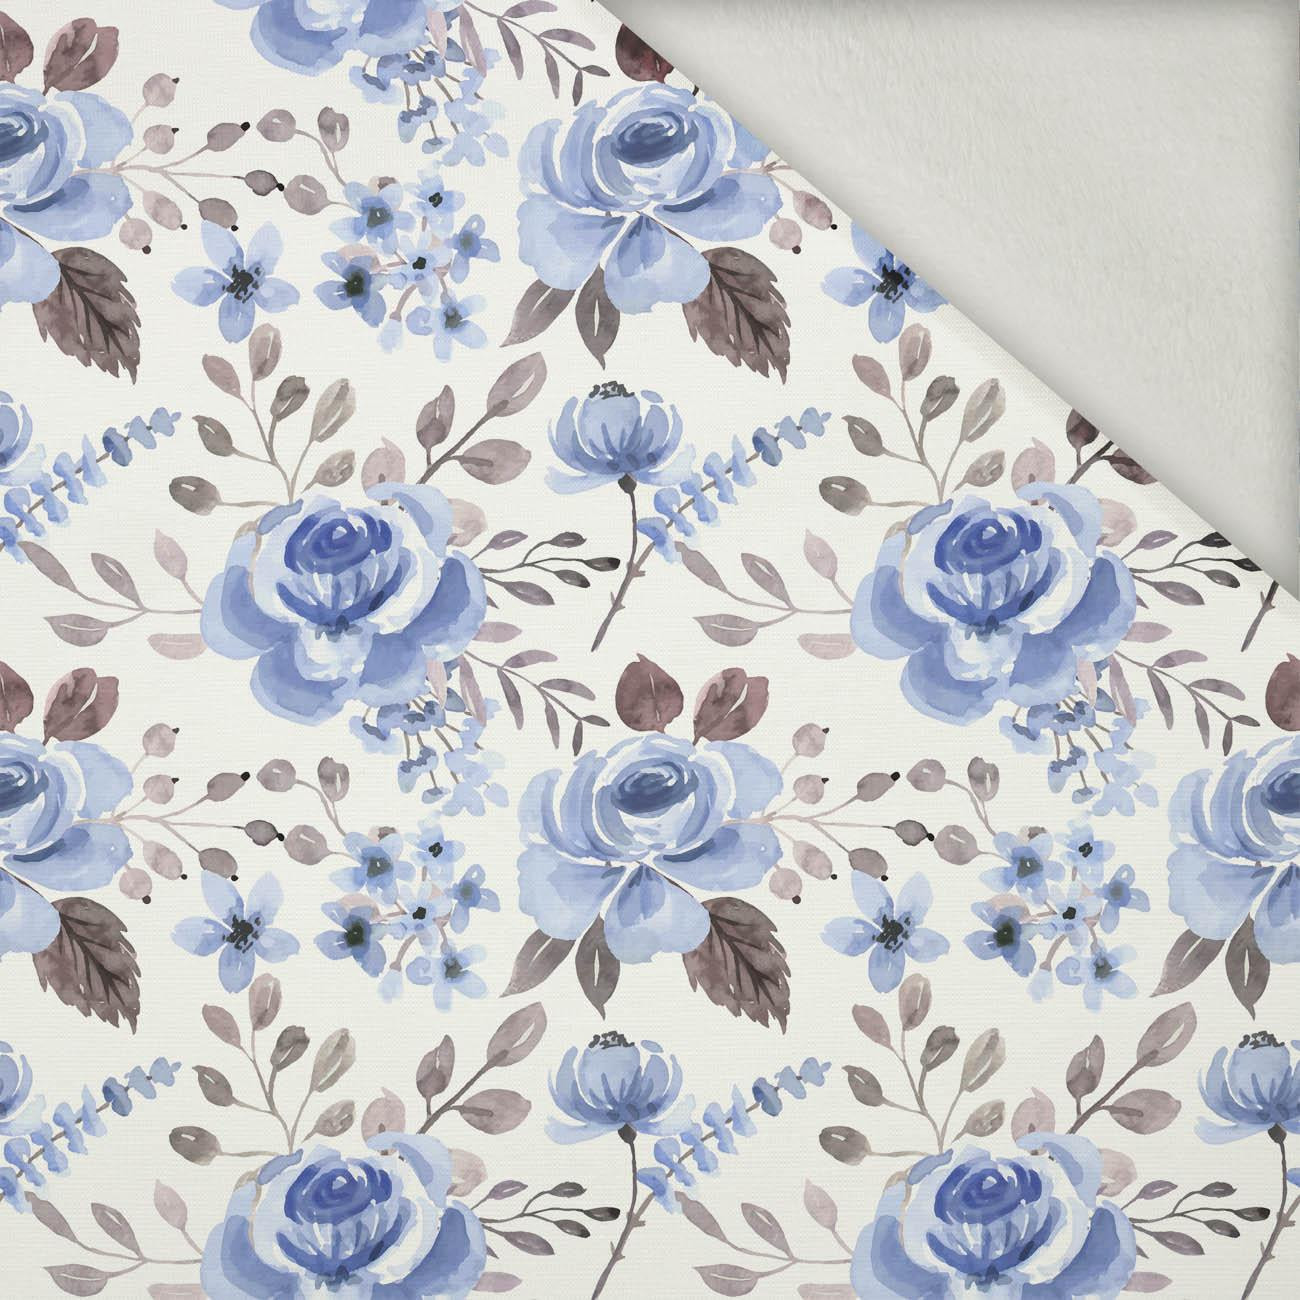 BLUE FLOWERS - brushed knit fabric with teddy / alpine fleece